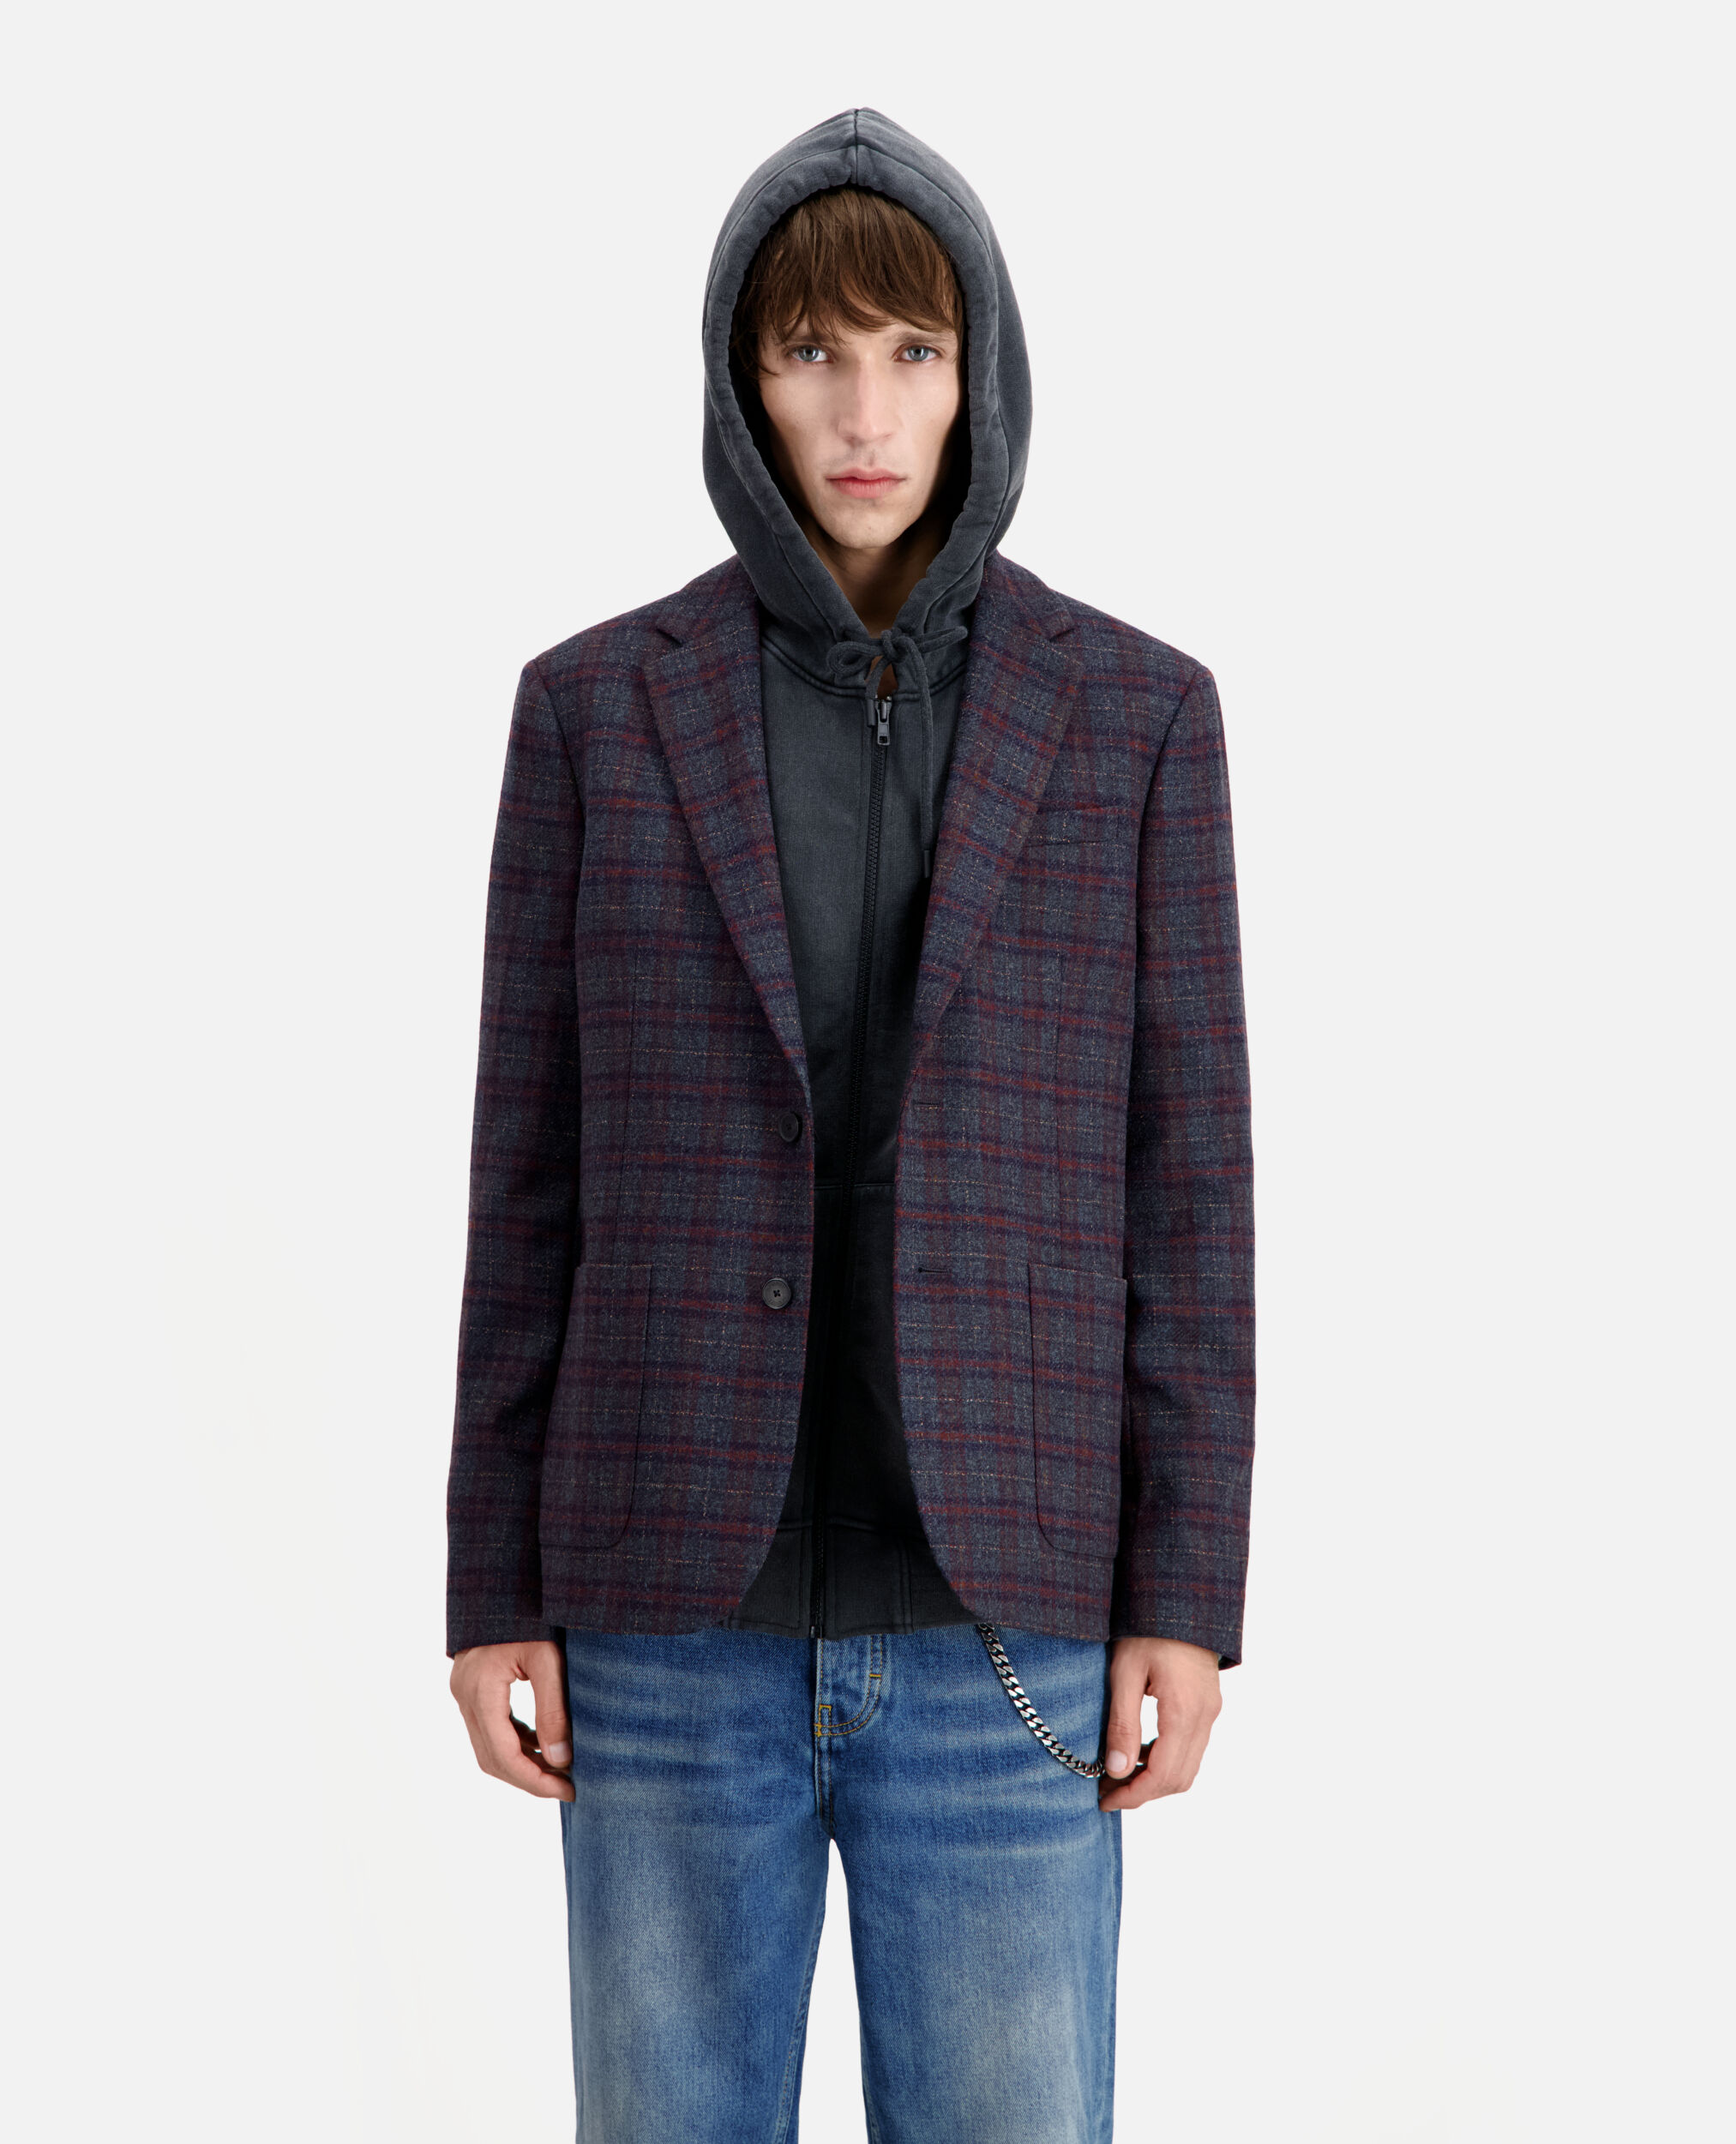 Checkered wool jacket, CARREAUX, hi-res image number null